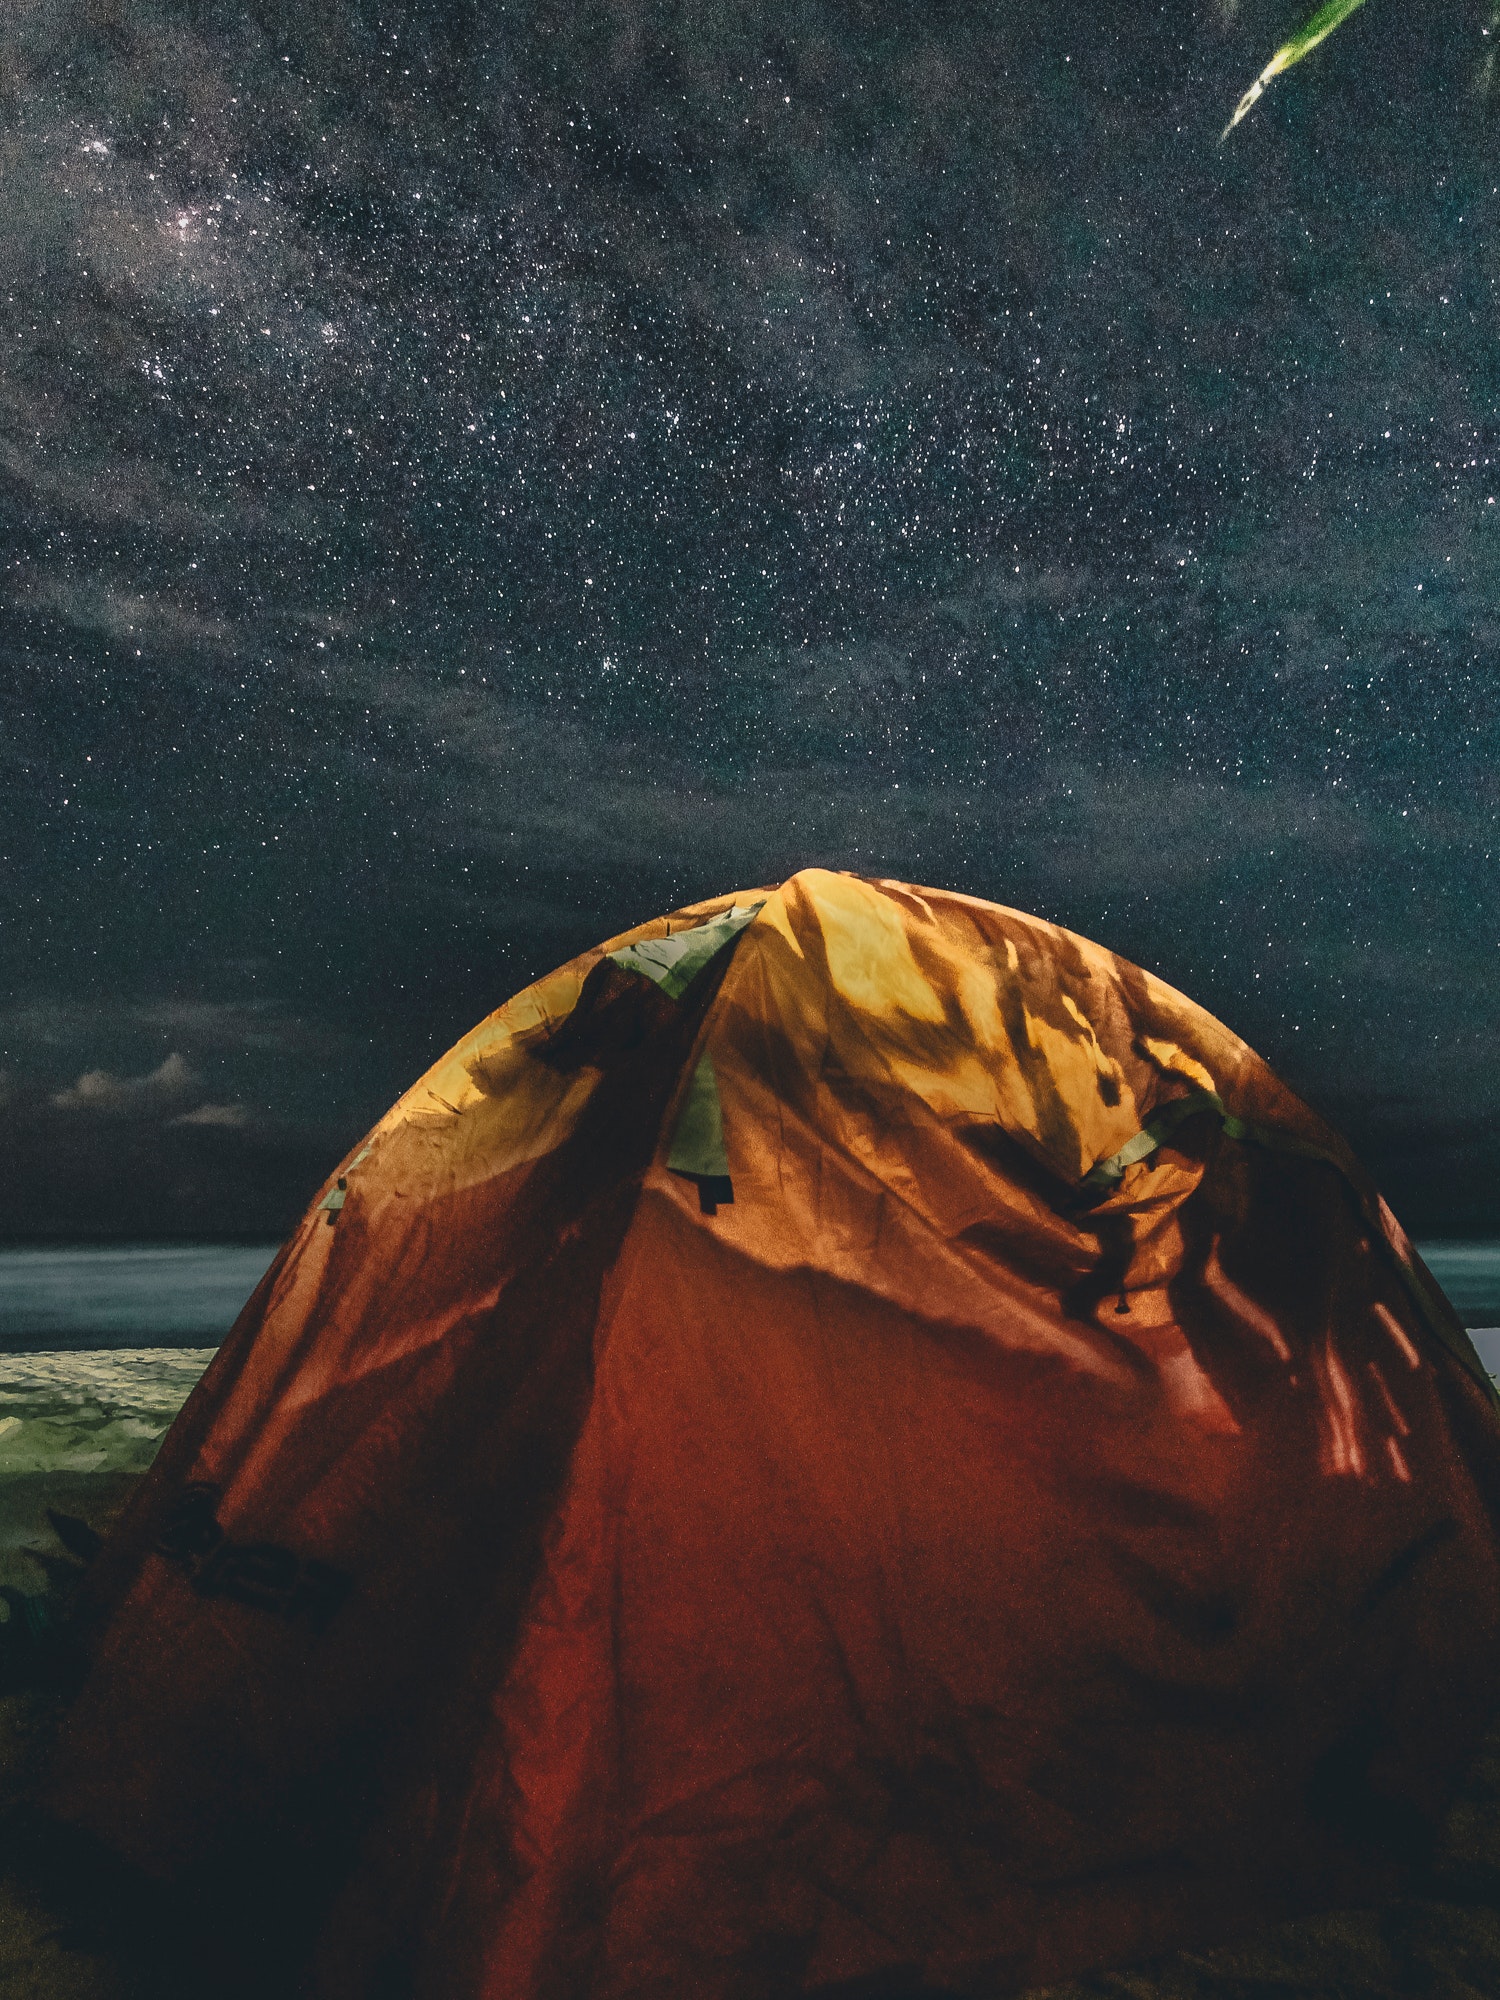 Orange and green camping tent under starry sky photo